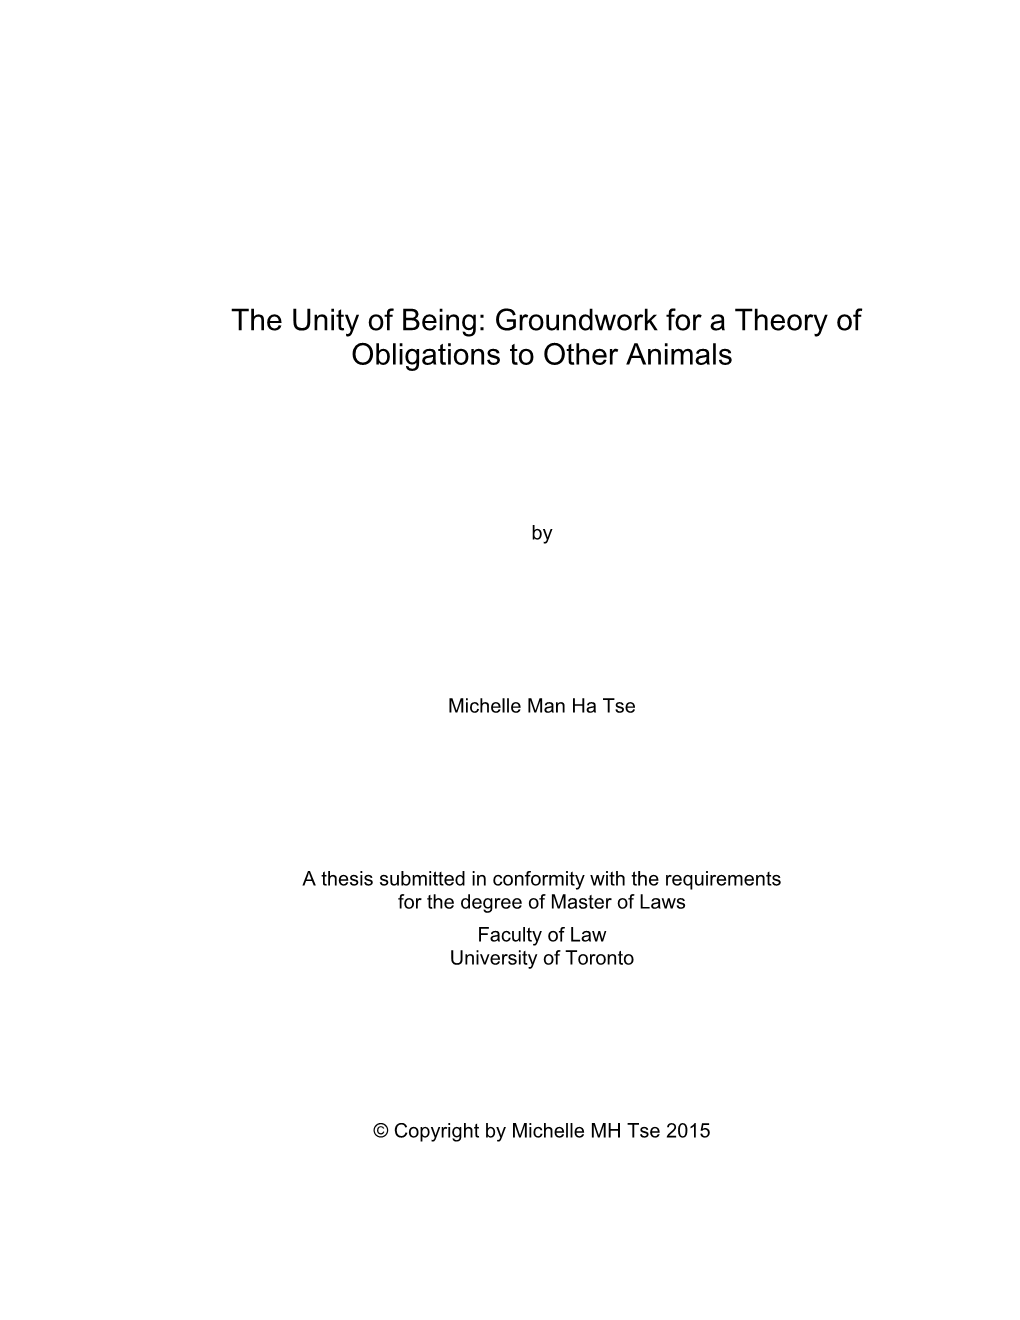 The Unity of Being: Groundwork for a Theory of Obligations to Other Animals